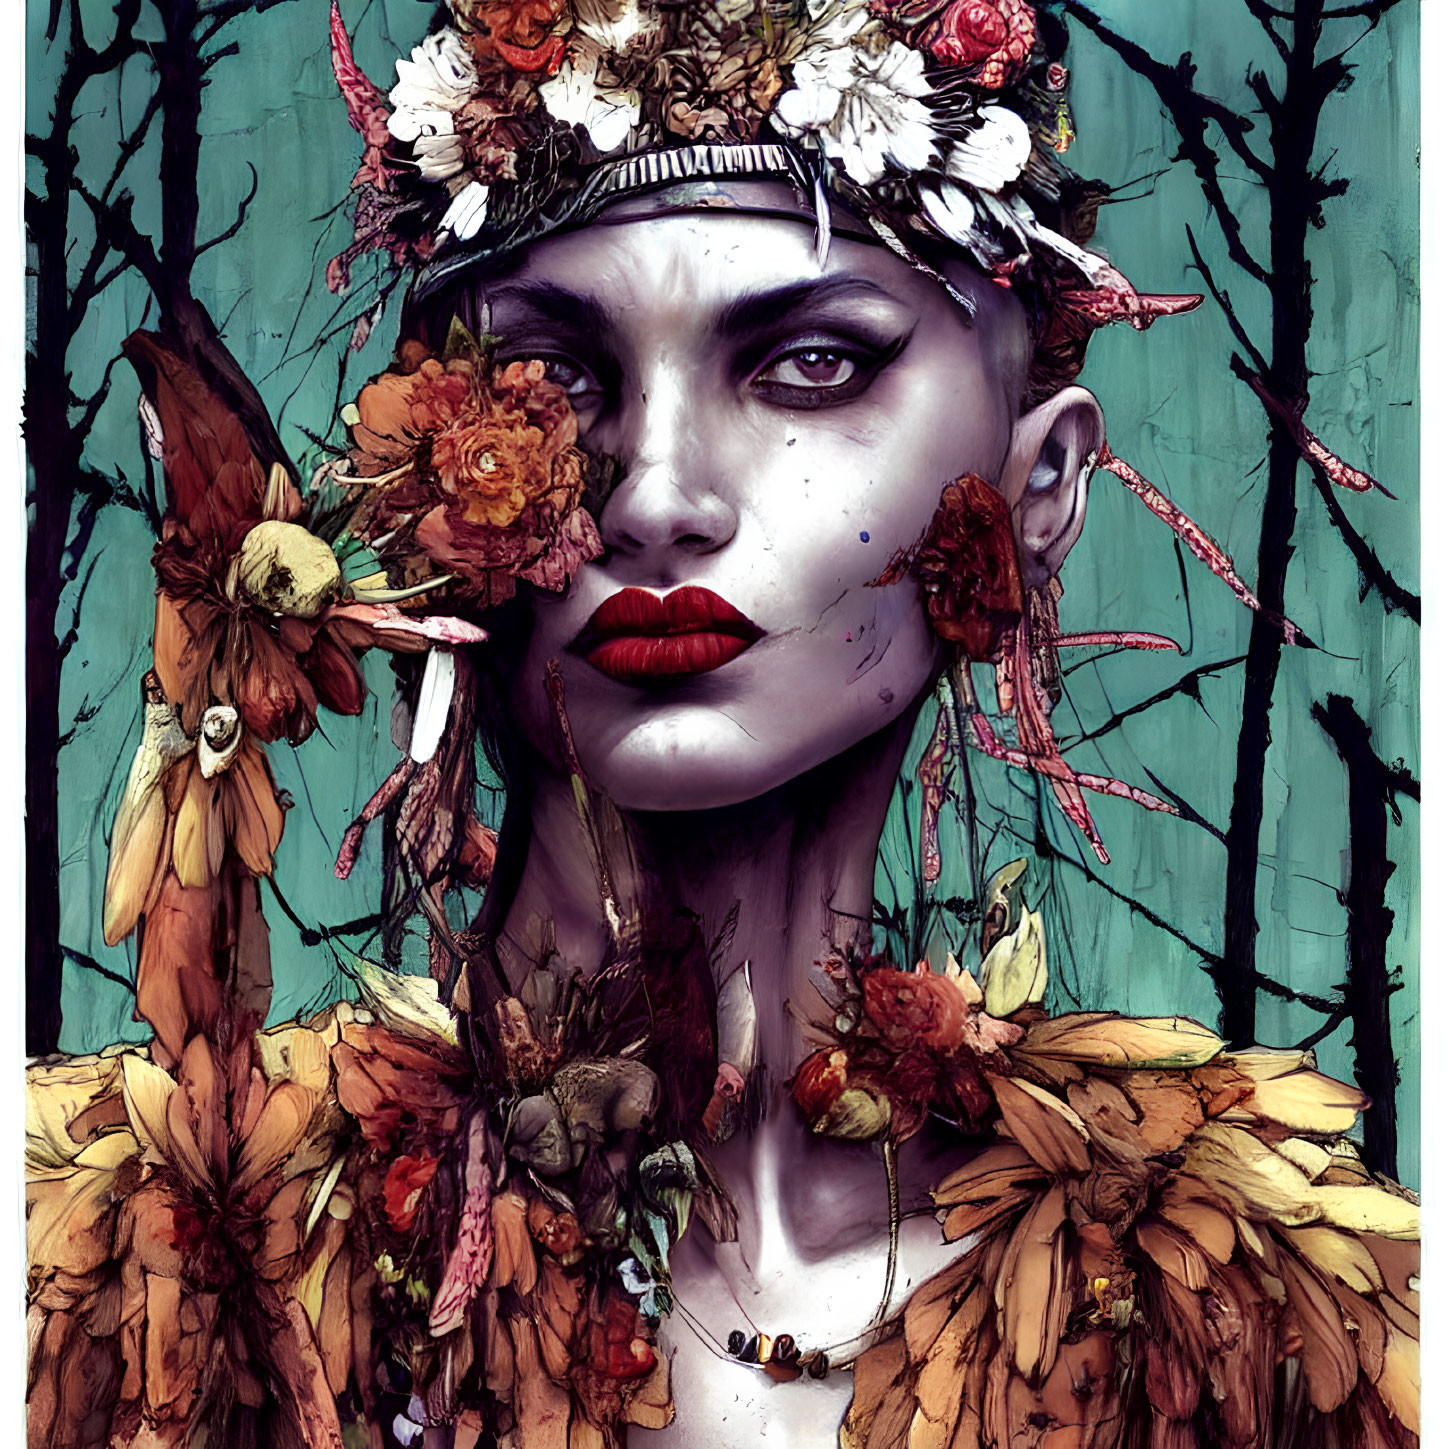 Surreal portrait of female figure with floral crown and autumn-colored flower dress against teal backdrop